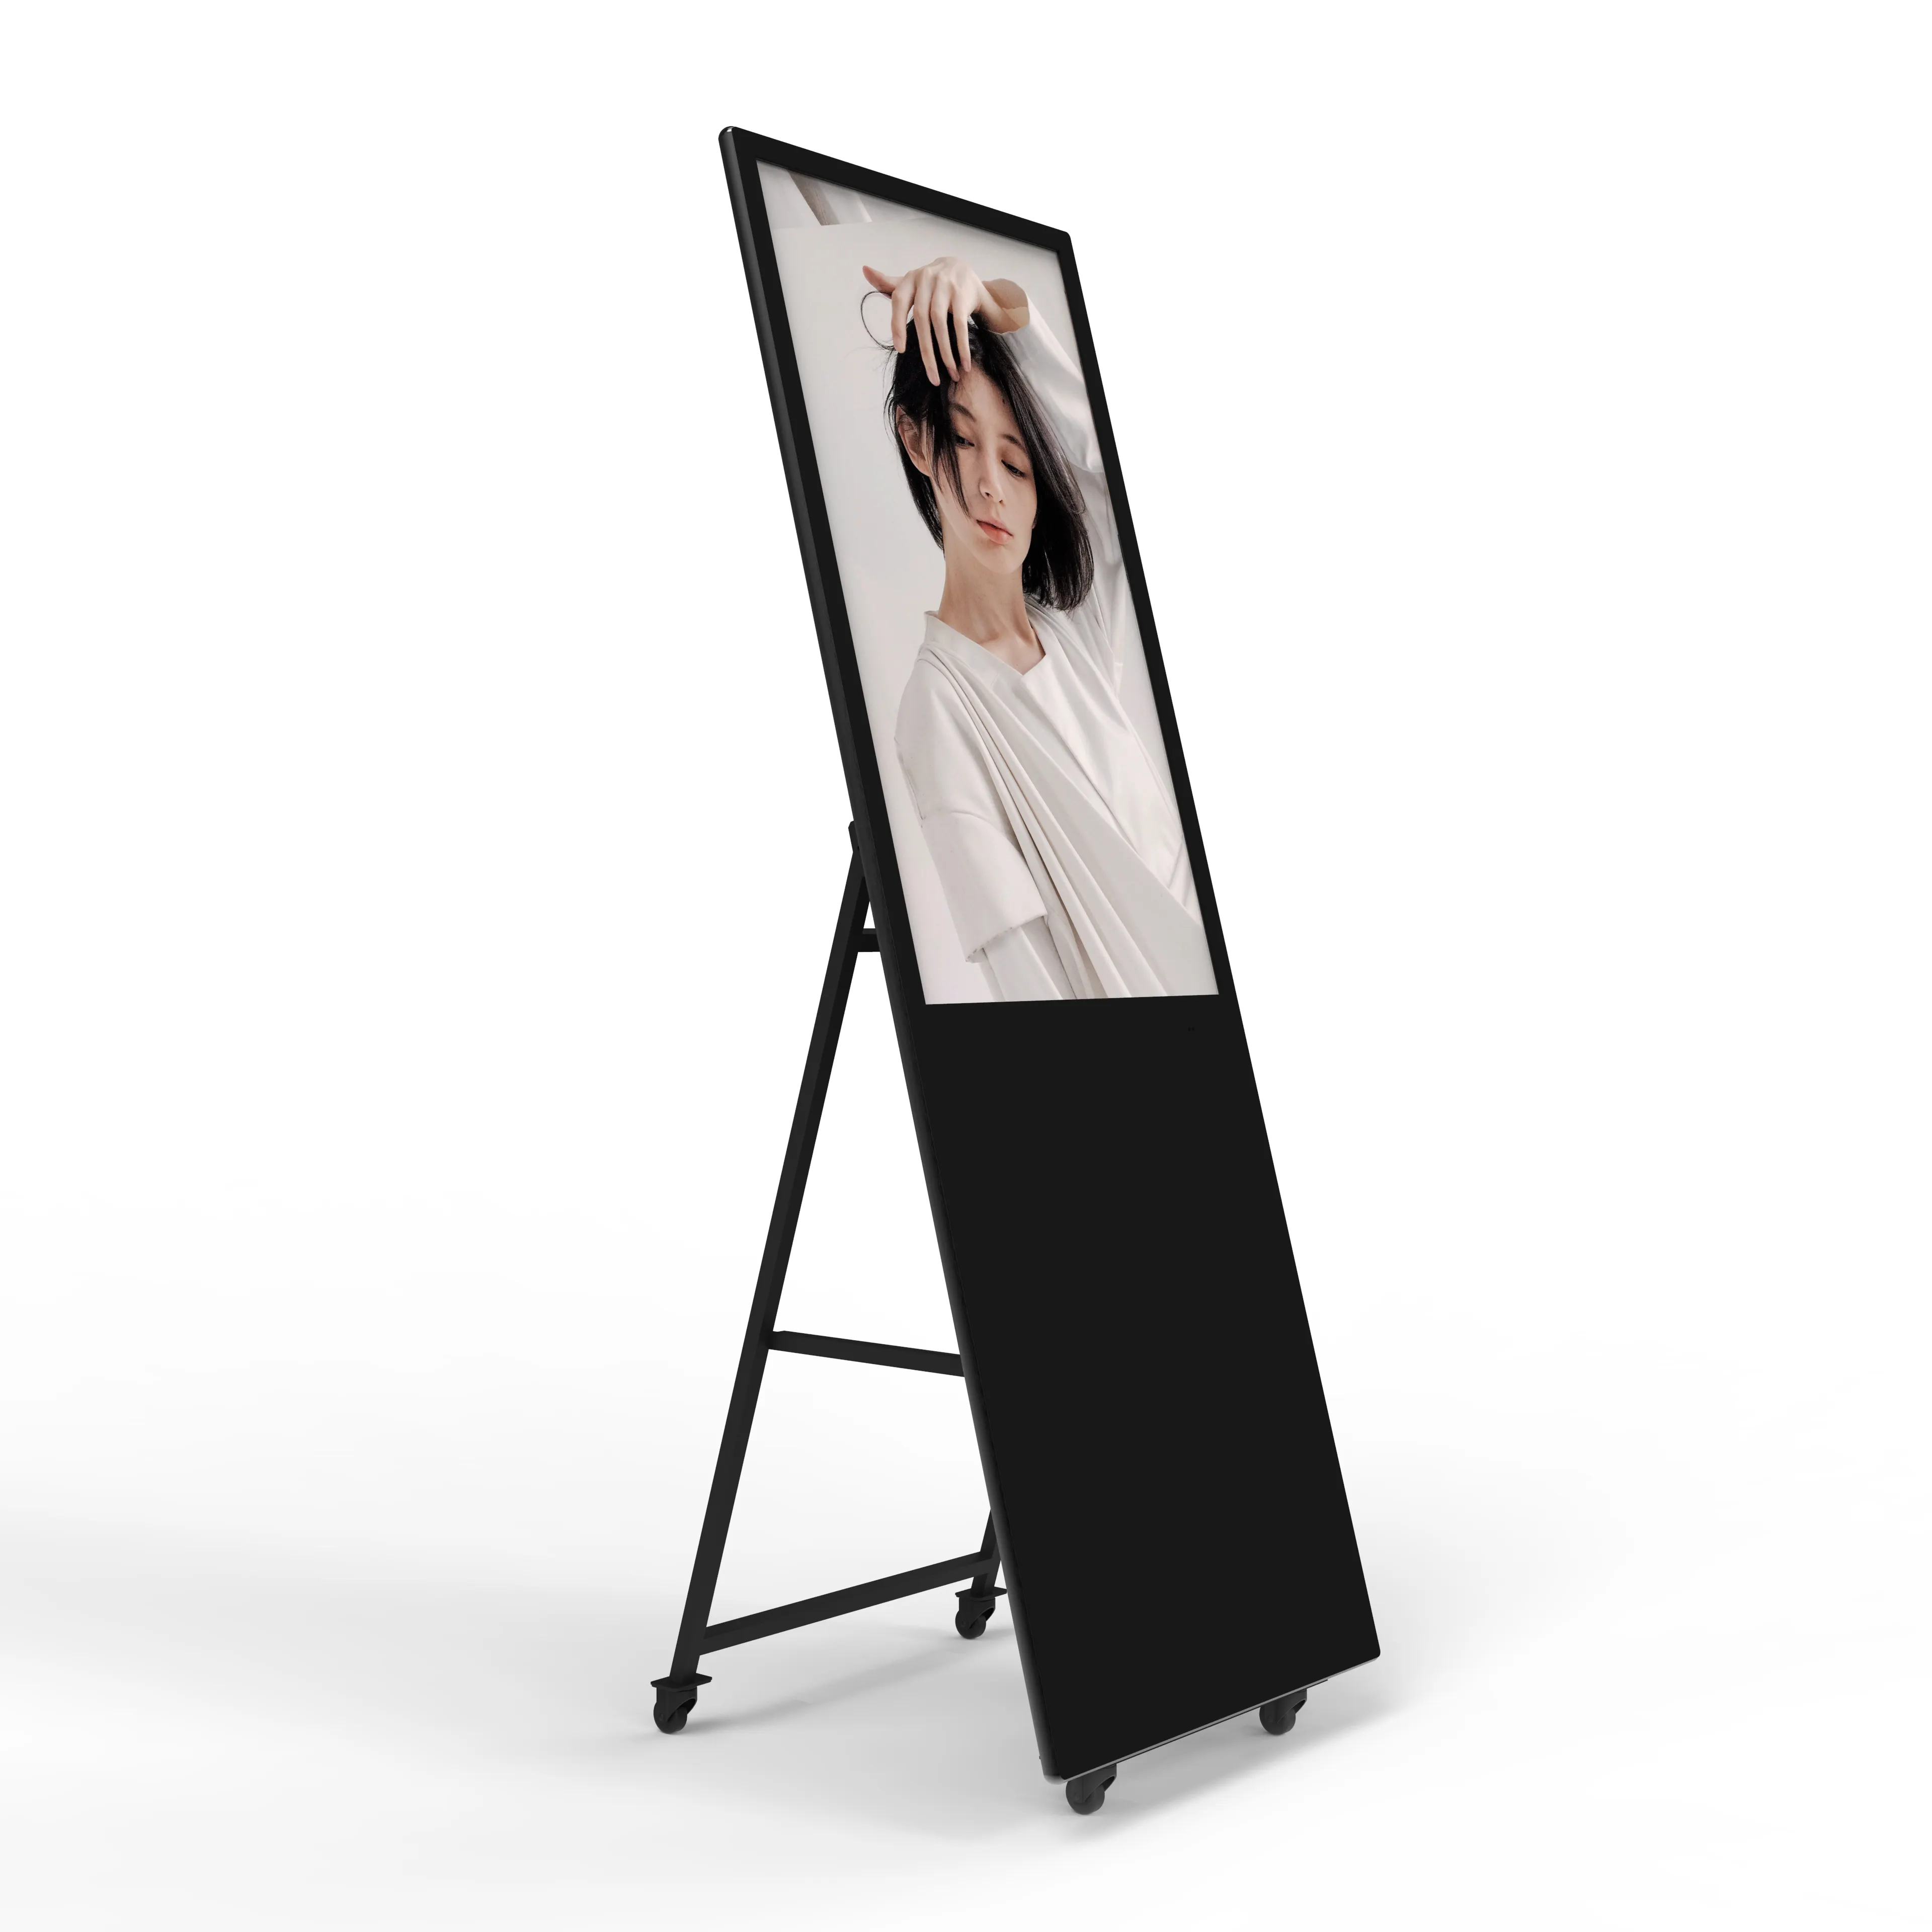 32 43 inch Movable foldable lcd touch screen android portable display advertising digital signage Lcd Digital Signage Display